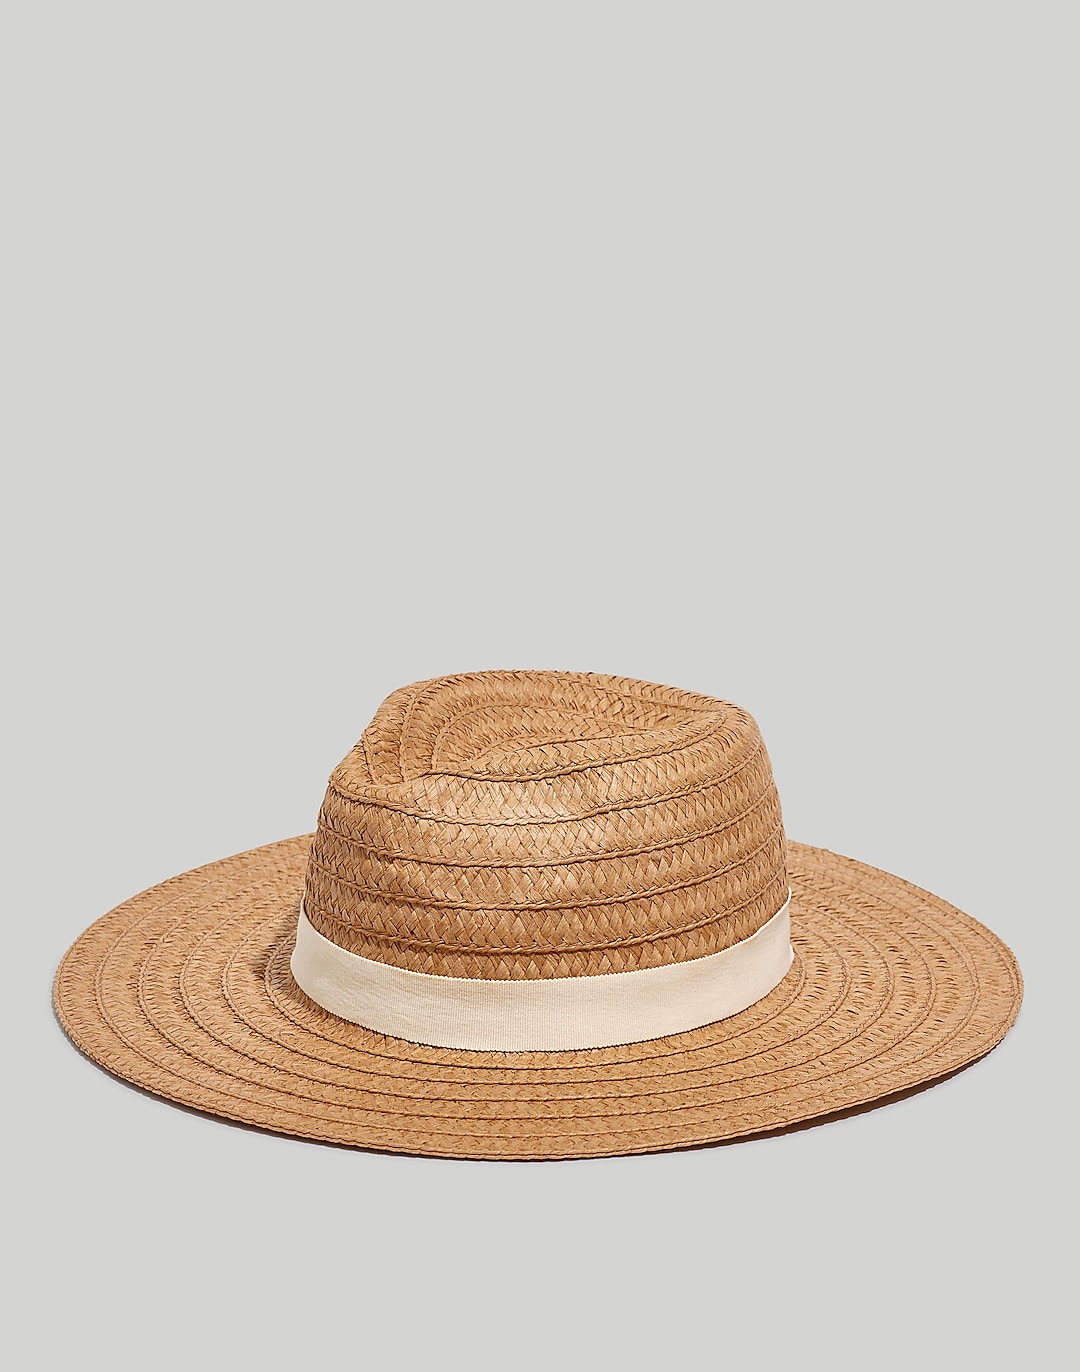 Packable Braided Straw Hat | Madewell